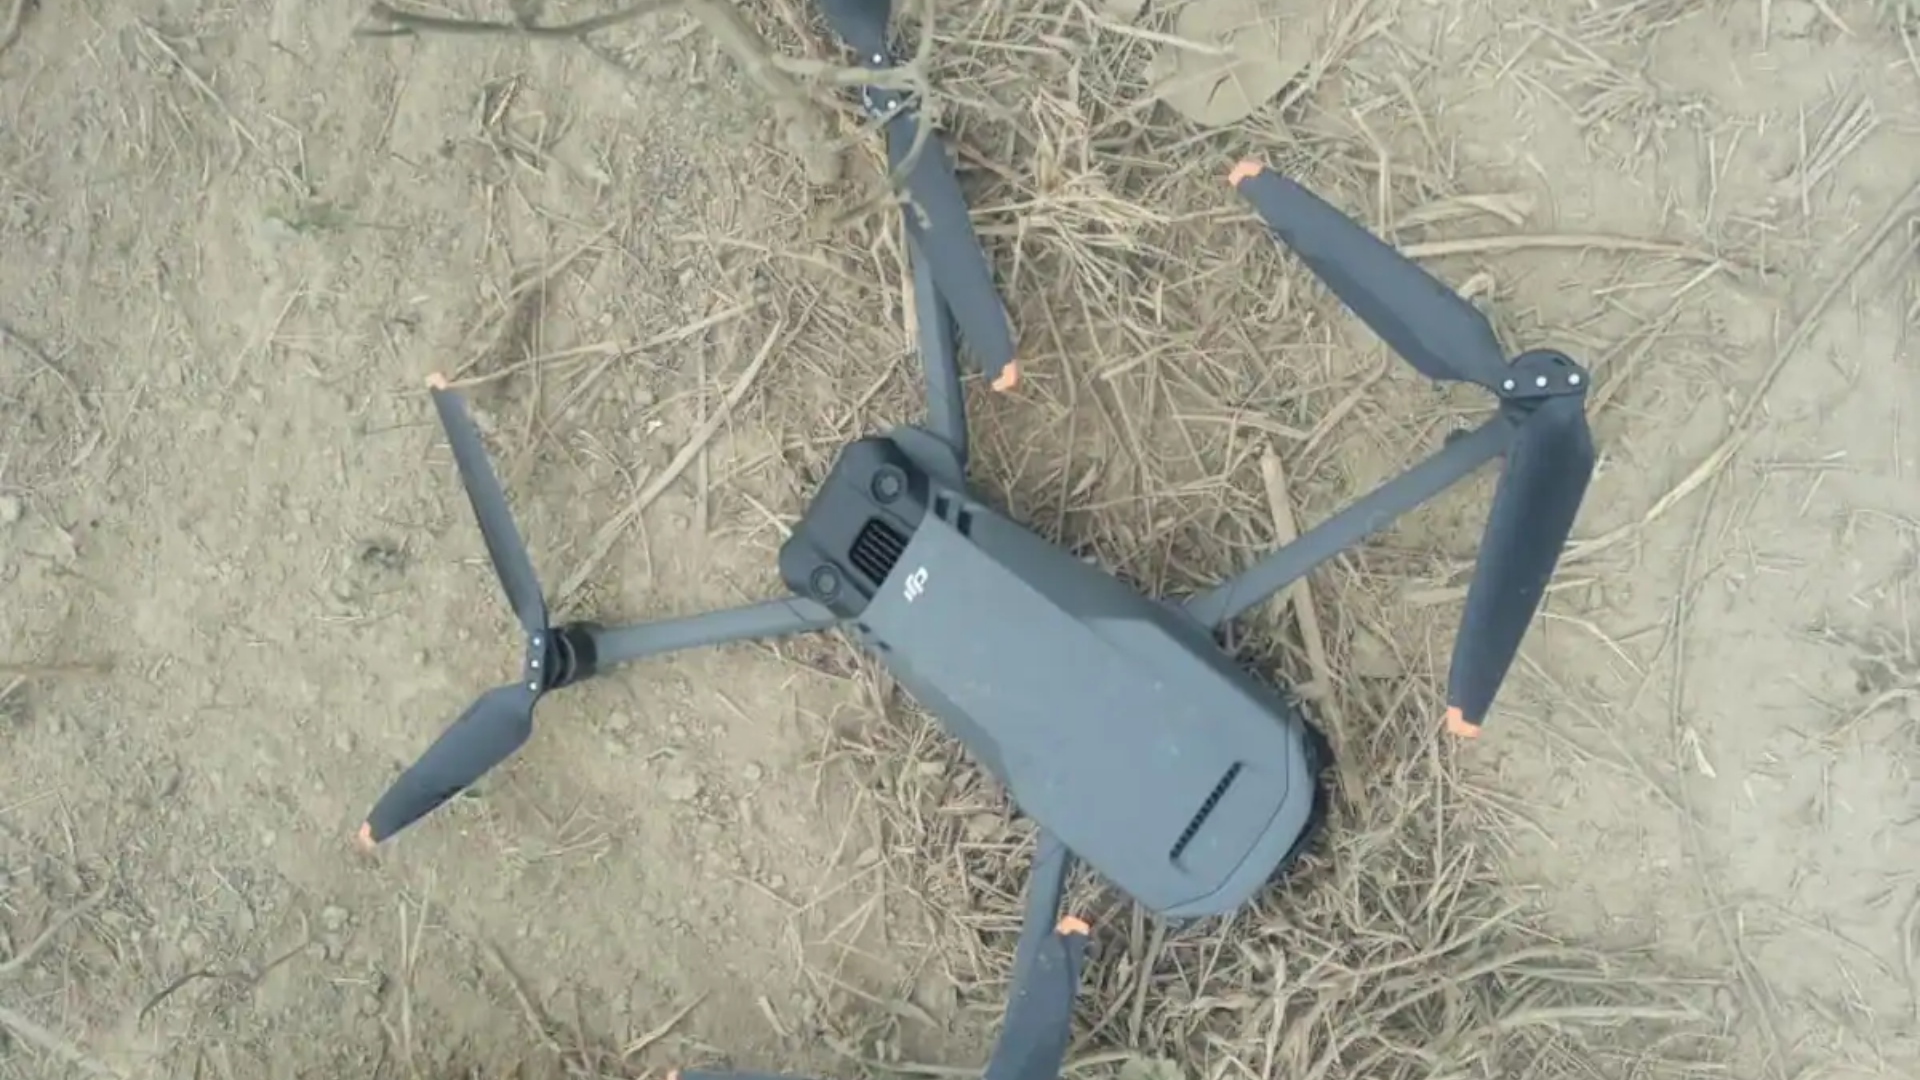 BSF, Punjab Police recover China made drones in border area